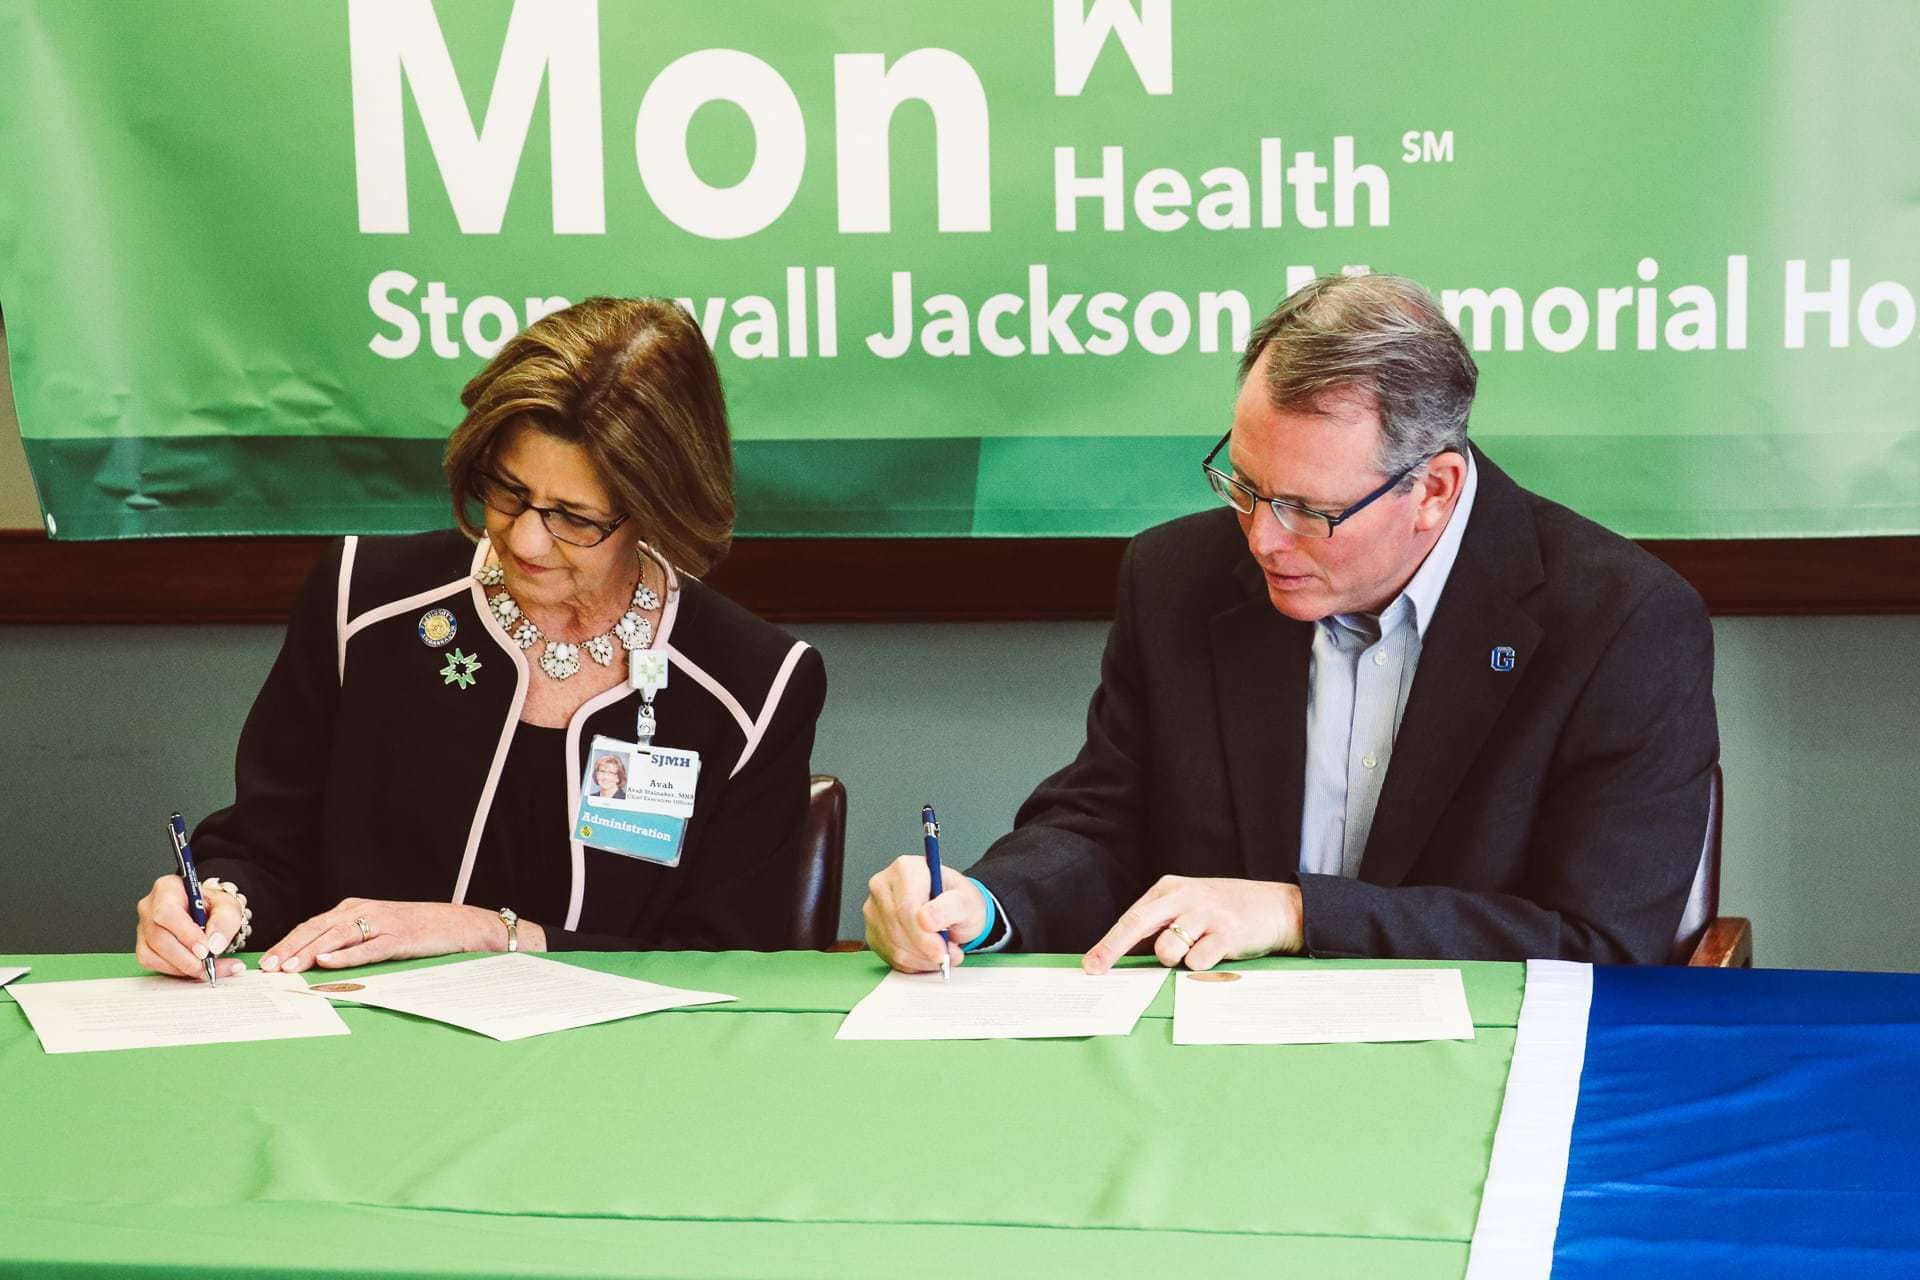 Stonewall Jackson Memorial Hospital CEO Avah Stalnaker, left, and Glenville State College President Dr. Tracy Pellett at the signing ceremony.